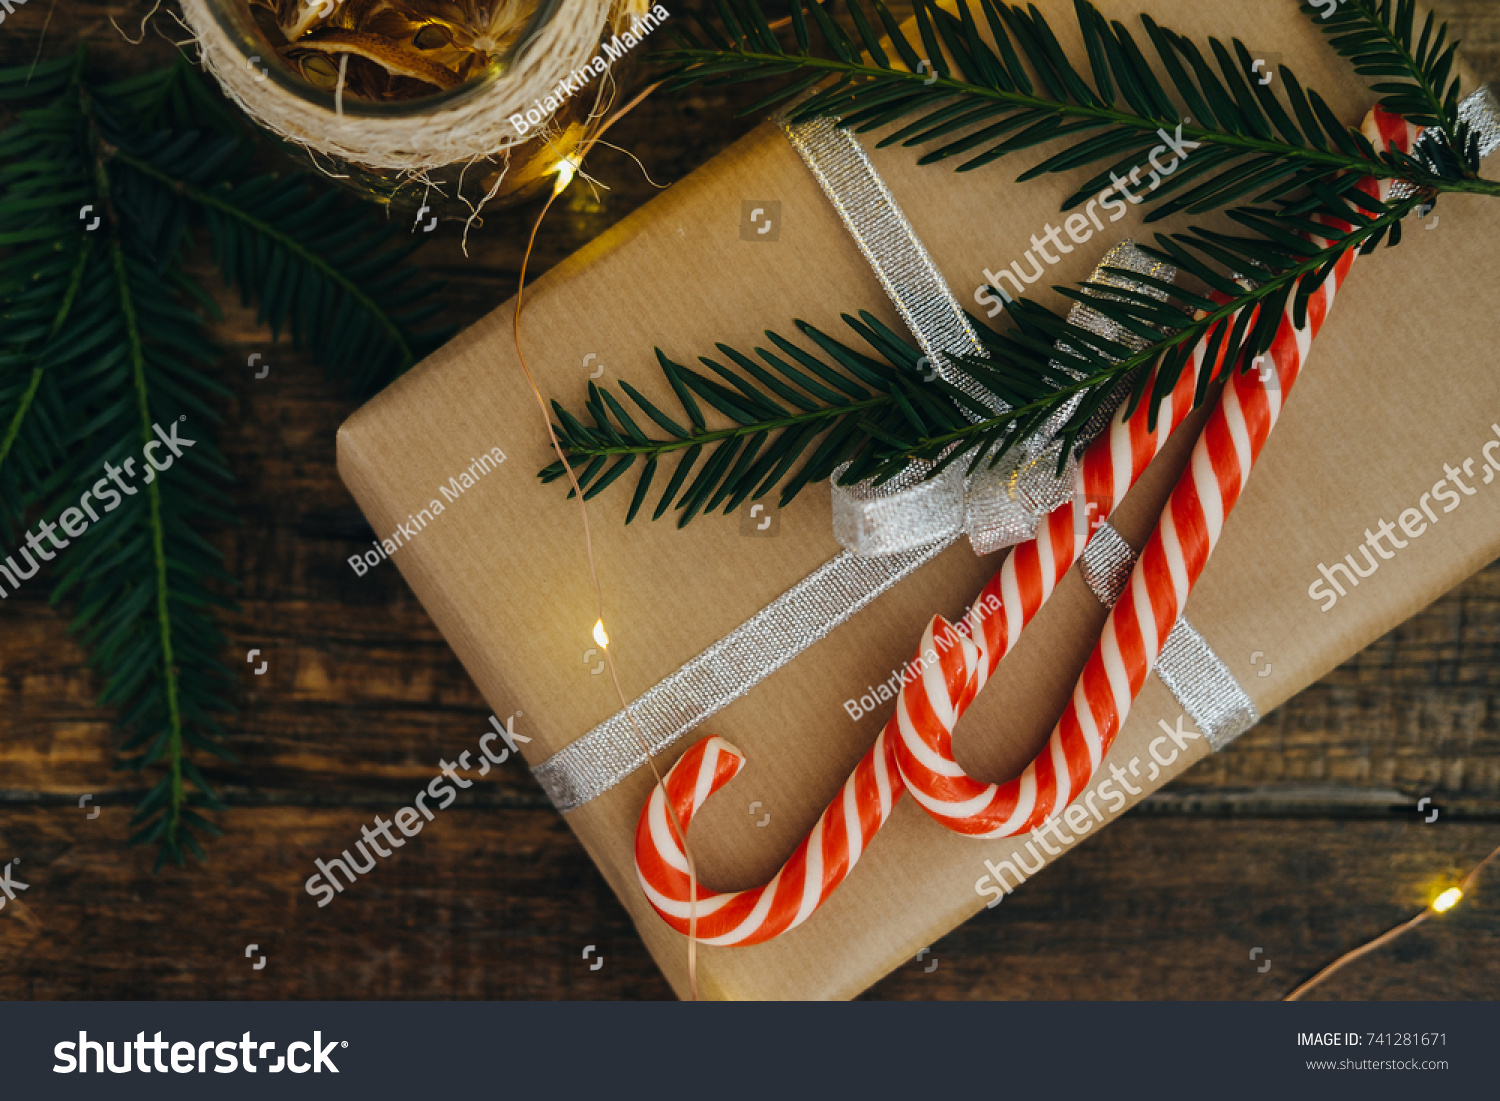 Top View Christmas present with candy canes and Fir tree branch on dark wooden background. Selective focus #741281671